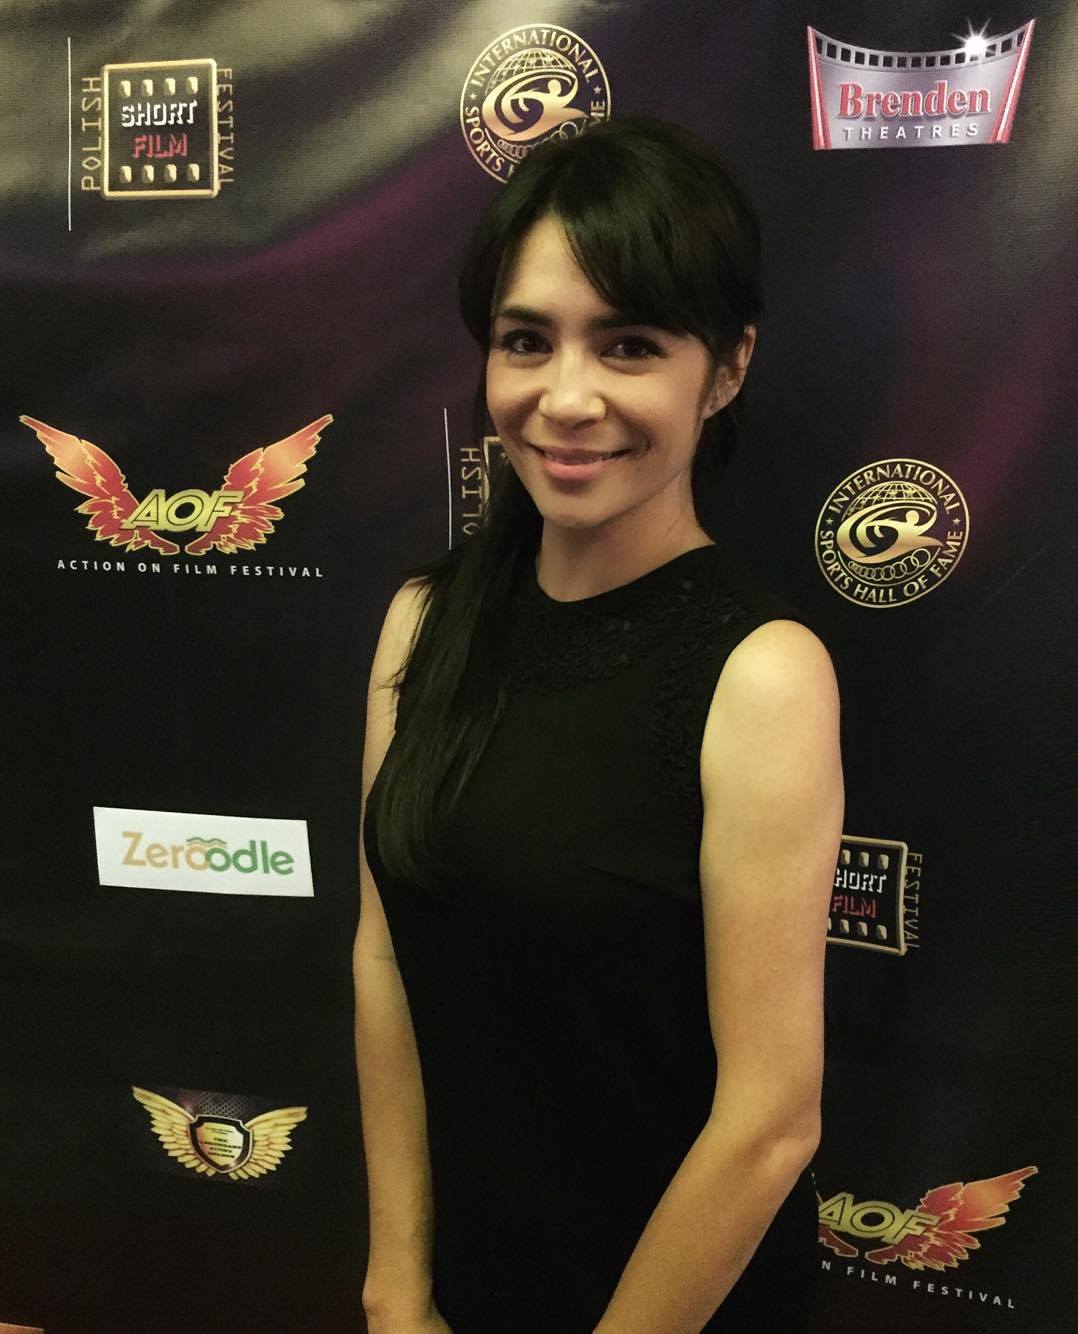 Michelle Lukes at Action on Film Festival in 2017